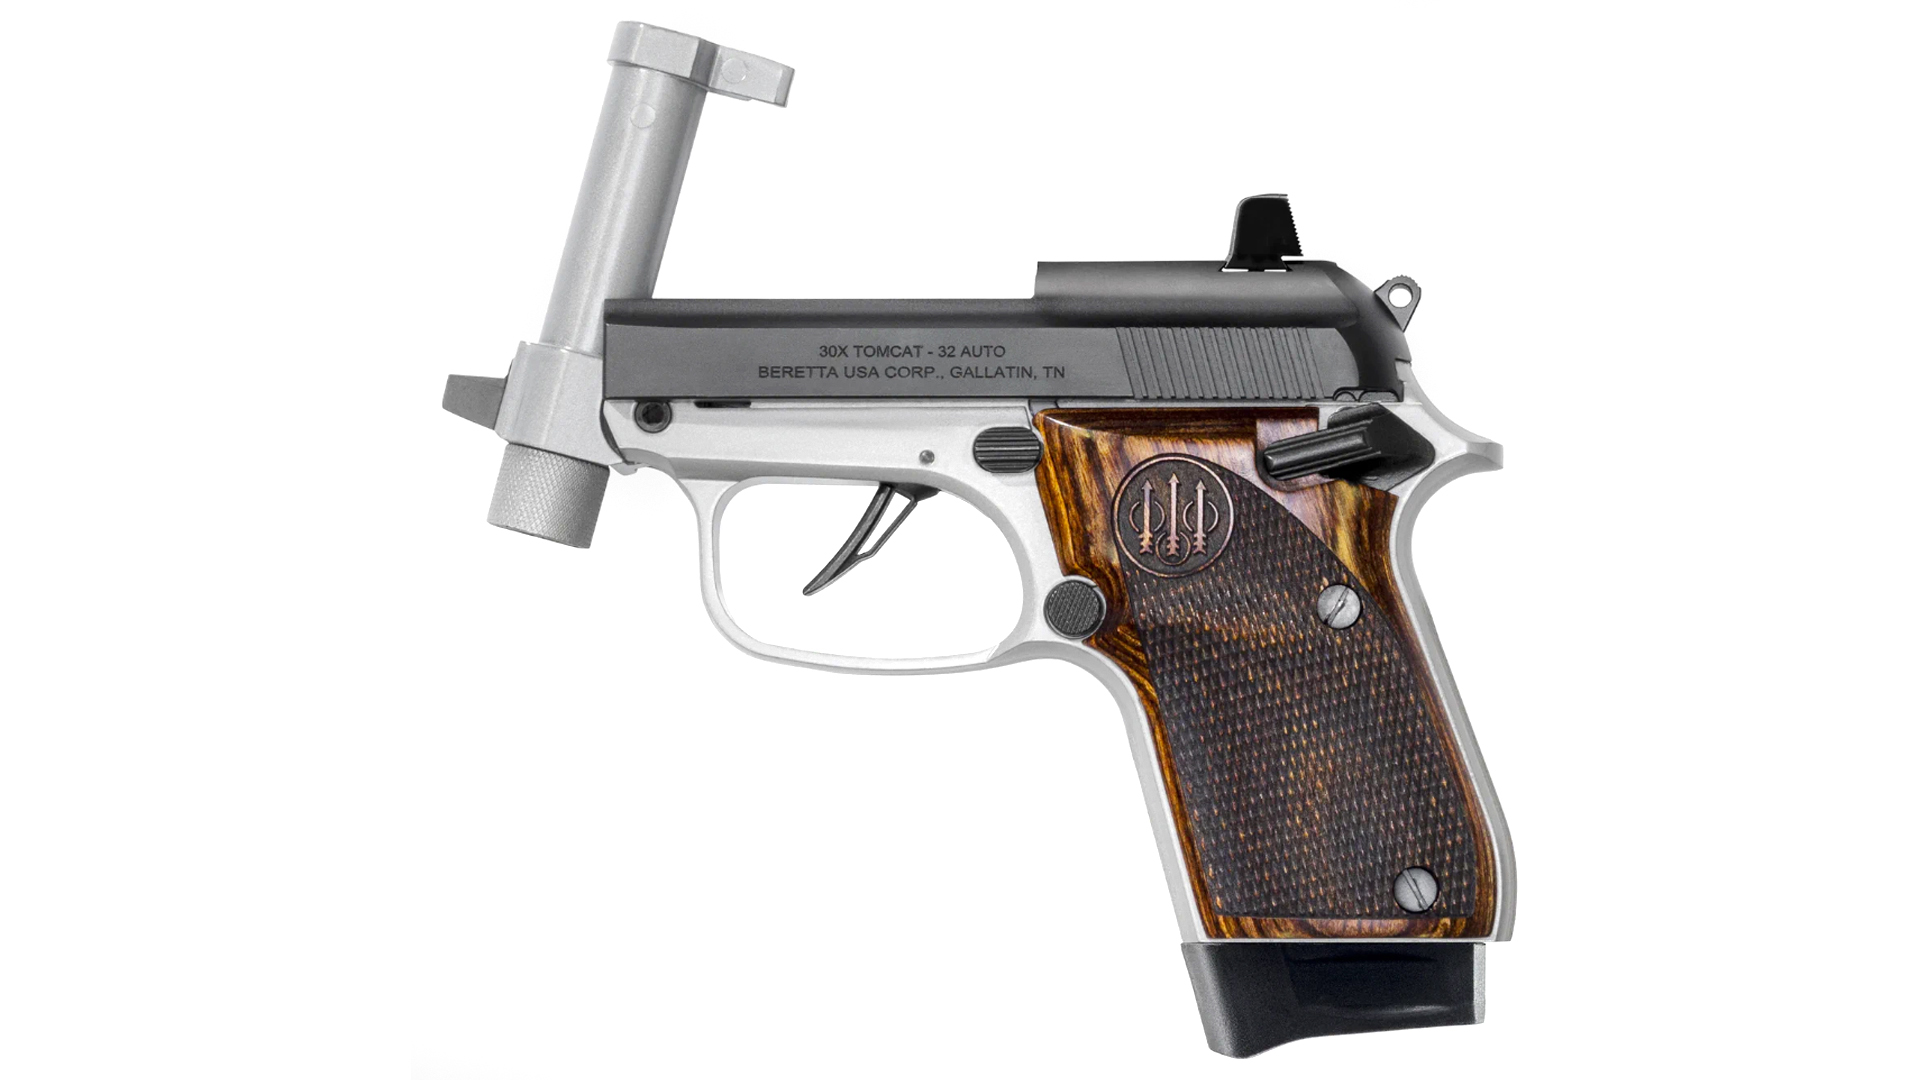 A left-side view of the Beretta 30X pistol with the barrel tipped up.